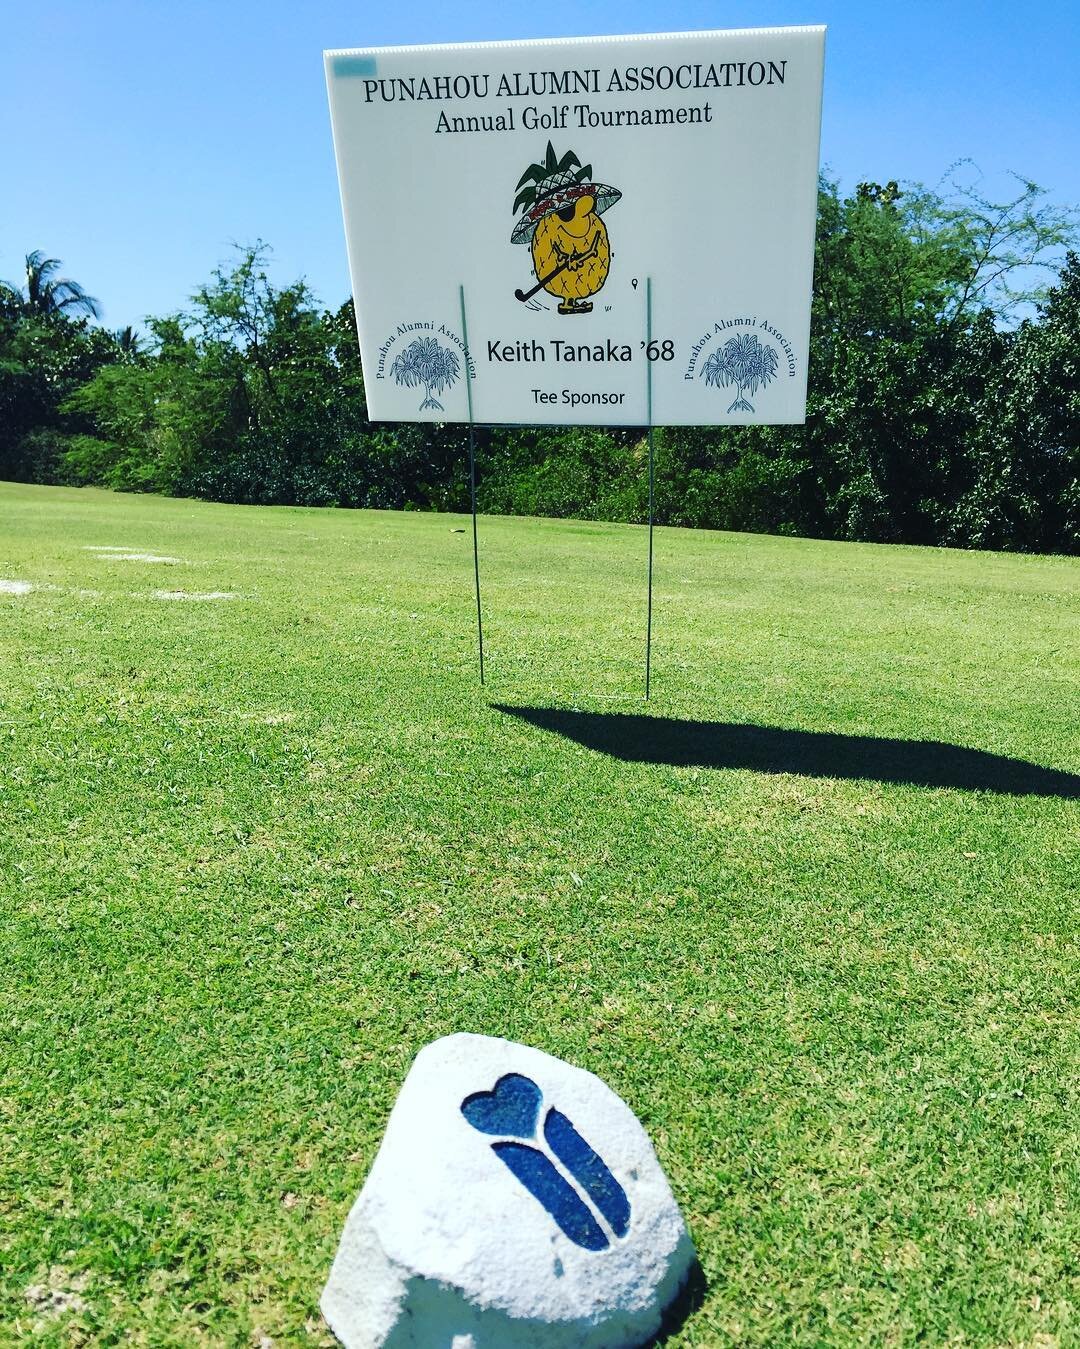 Tradition for @rootsandrelics at the annual @punahouschool golf tournament #goodtimes #punahou 💙⛳️💛